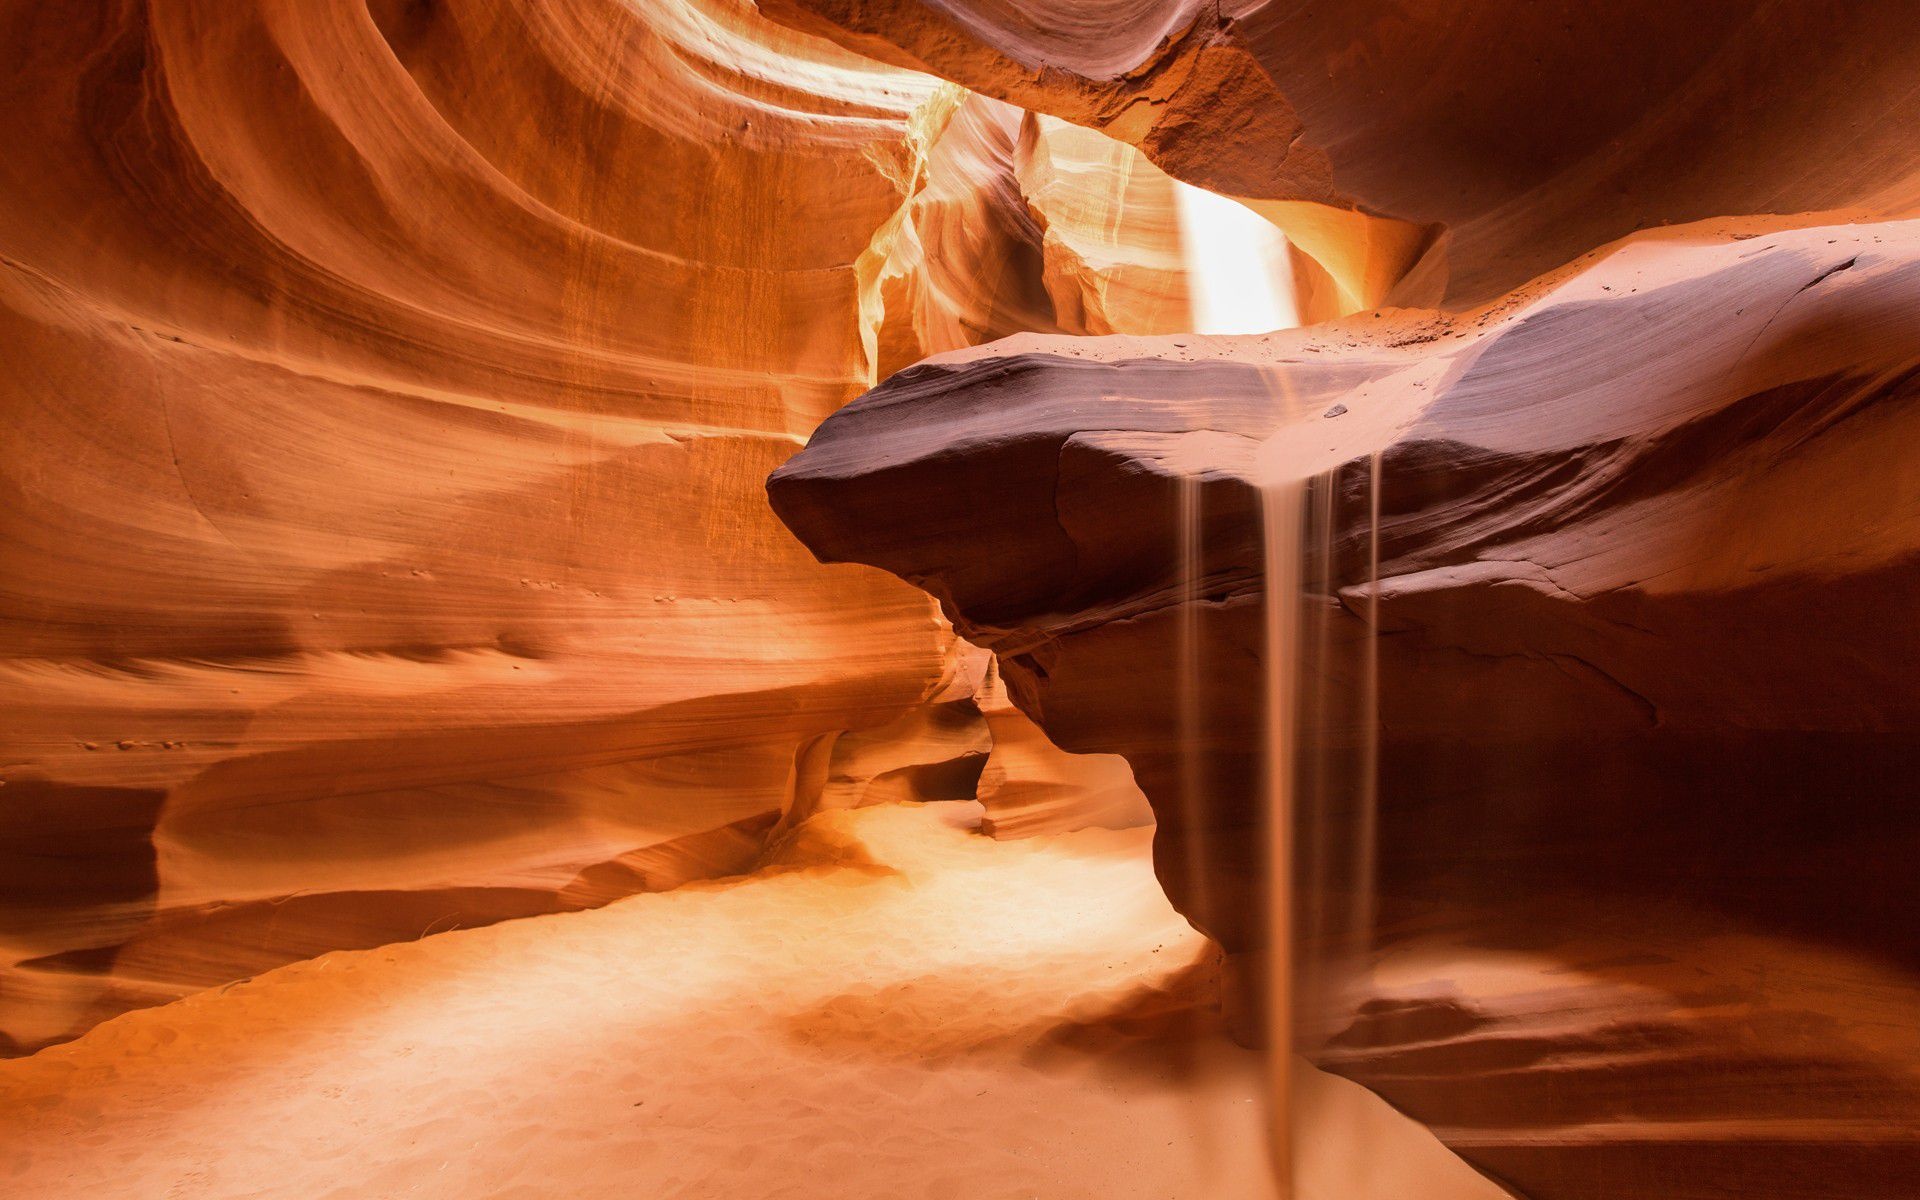 Free download Antelope Canyon wallpapers, Stunning backgrounds, Desktop, mobile, tablet, Nature's beauty, 1920x1200 HD Desktop